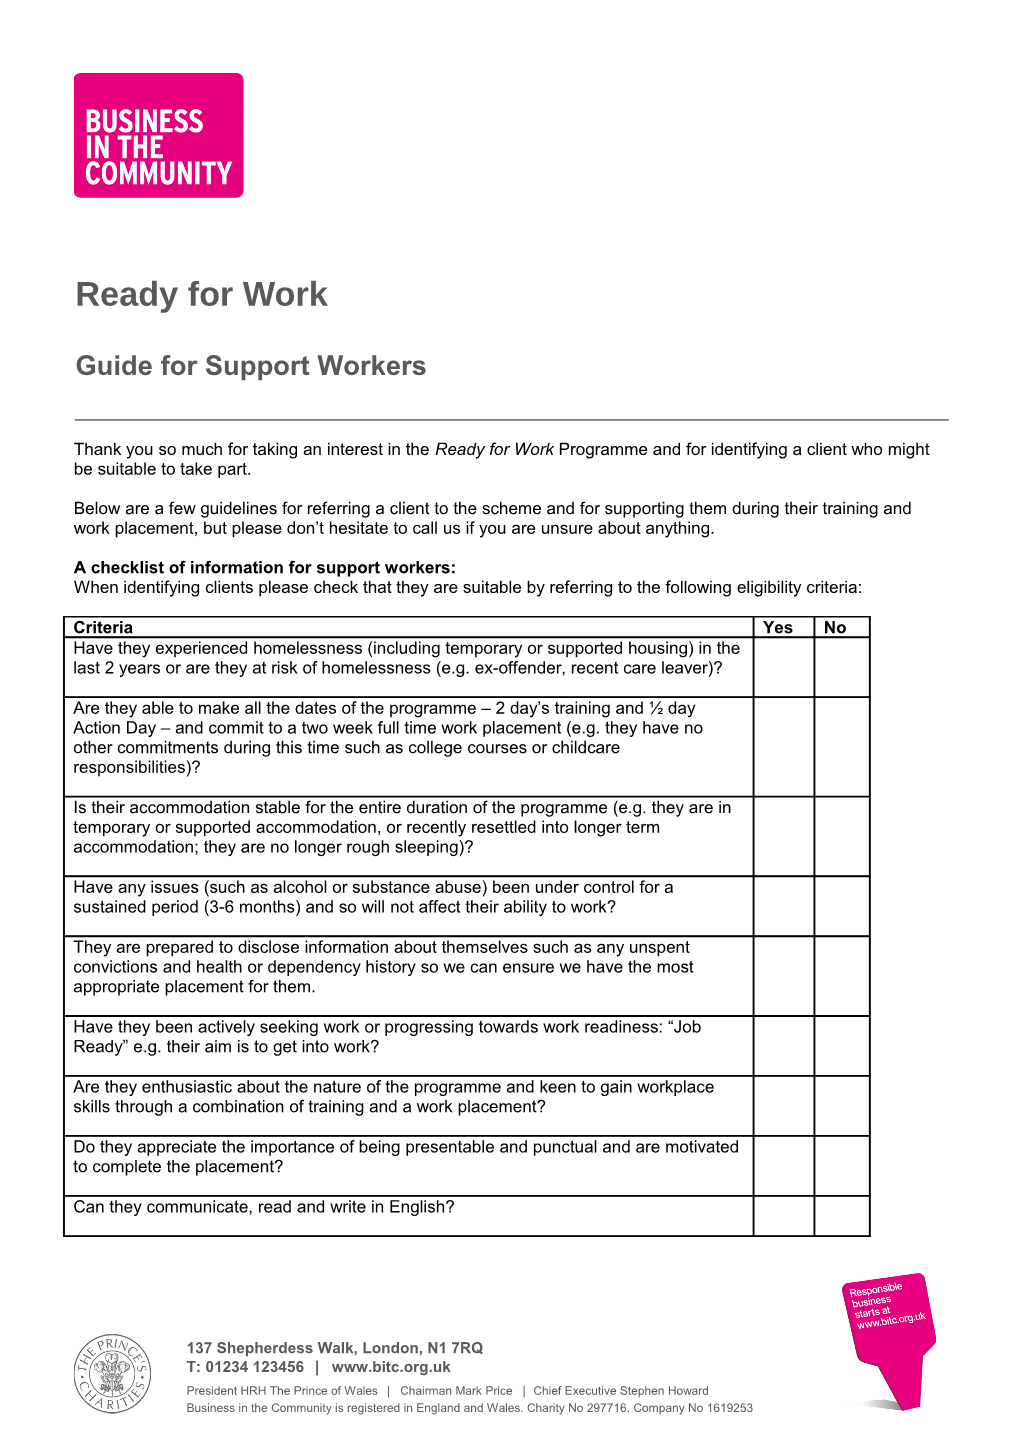 Guide for Support Workers